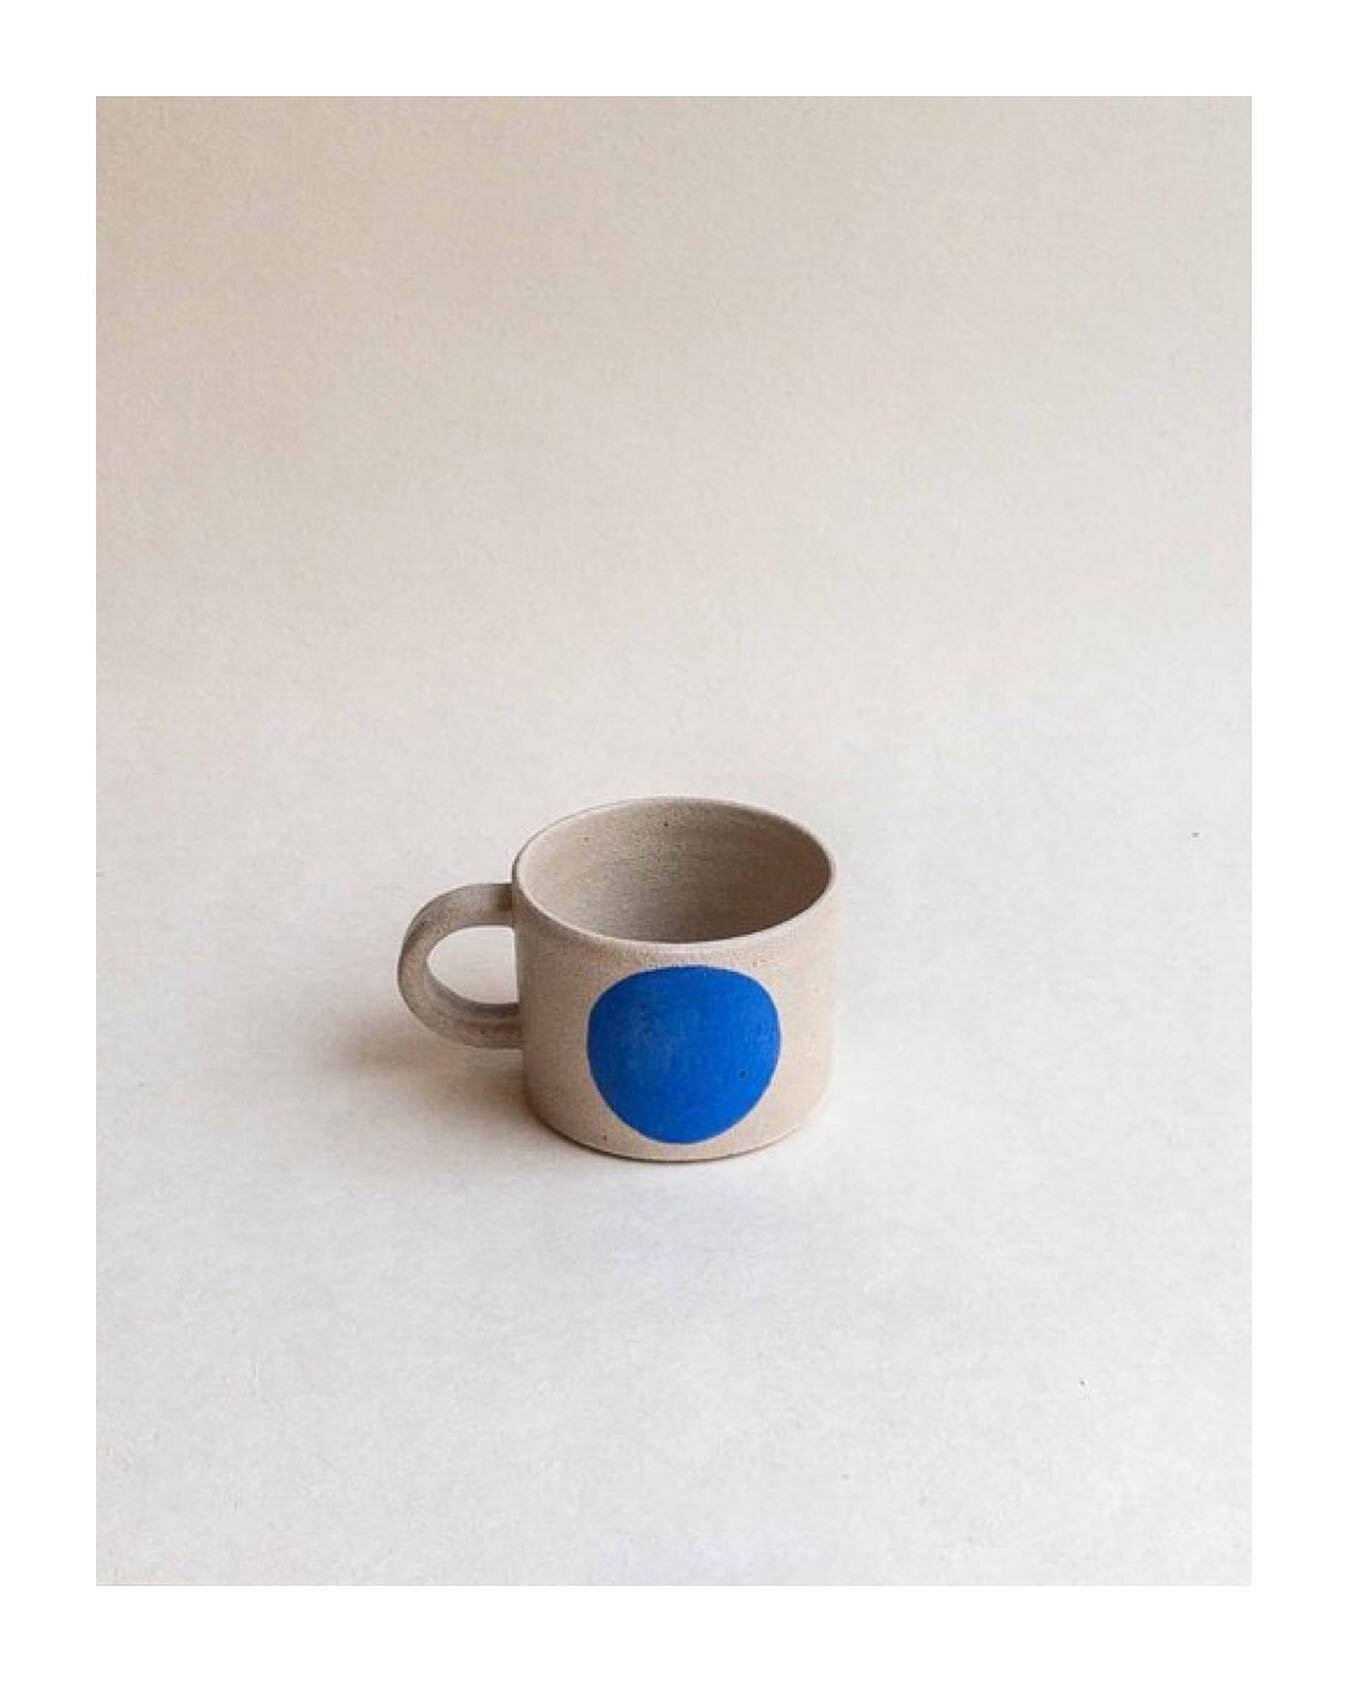 The beautiful Dott cup from @julie_solberg | Read our conversation with the Oslo-based photographer up on the site. | Link in bio.